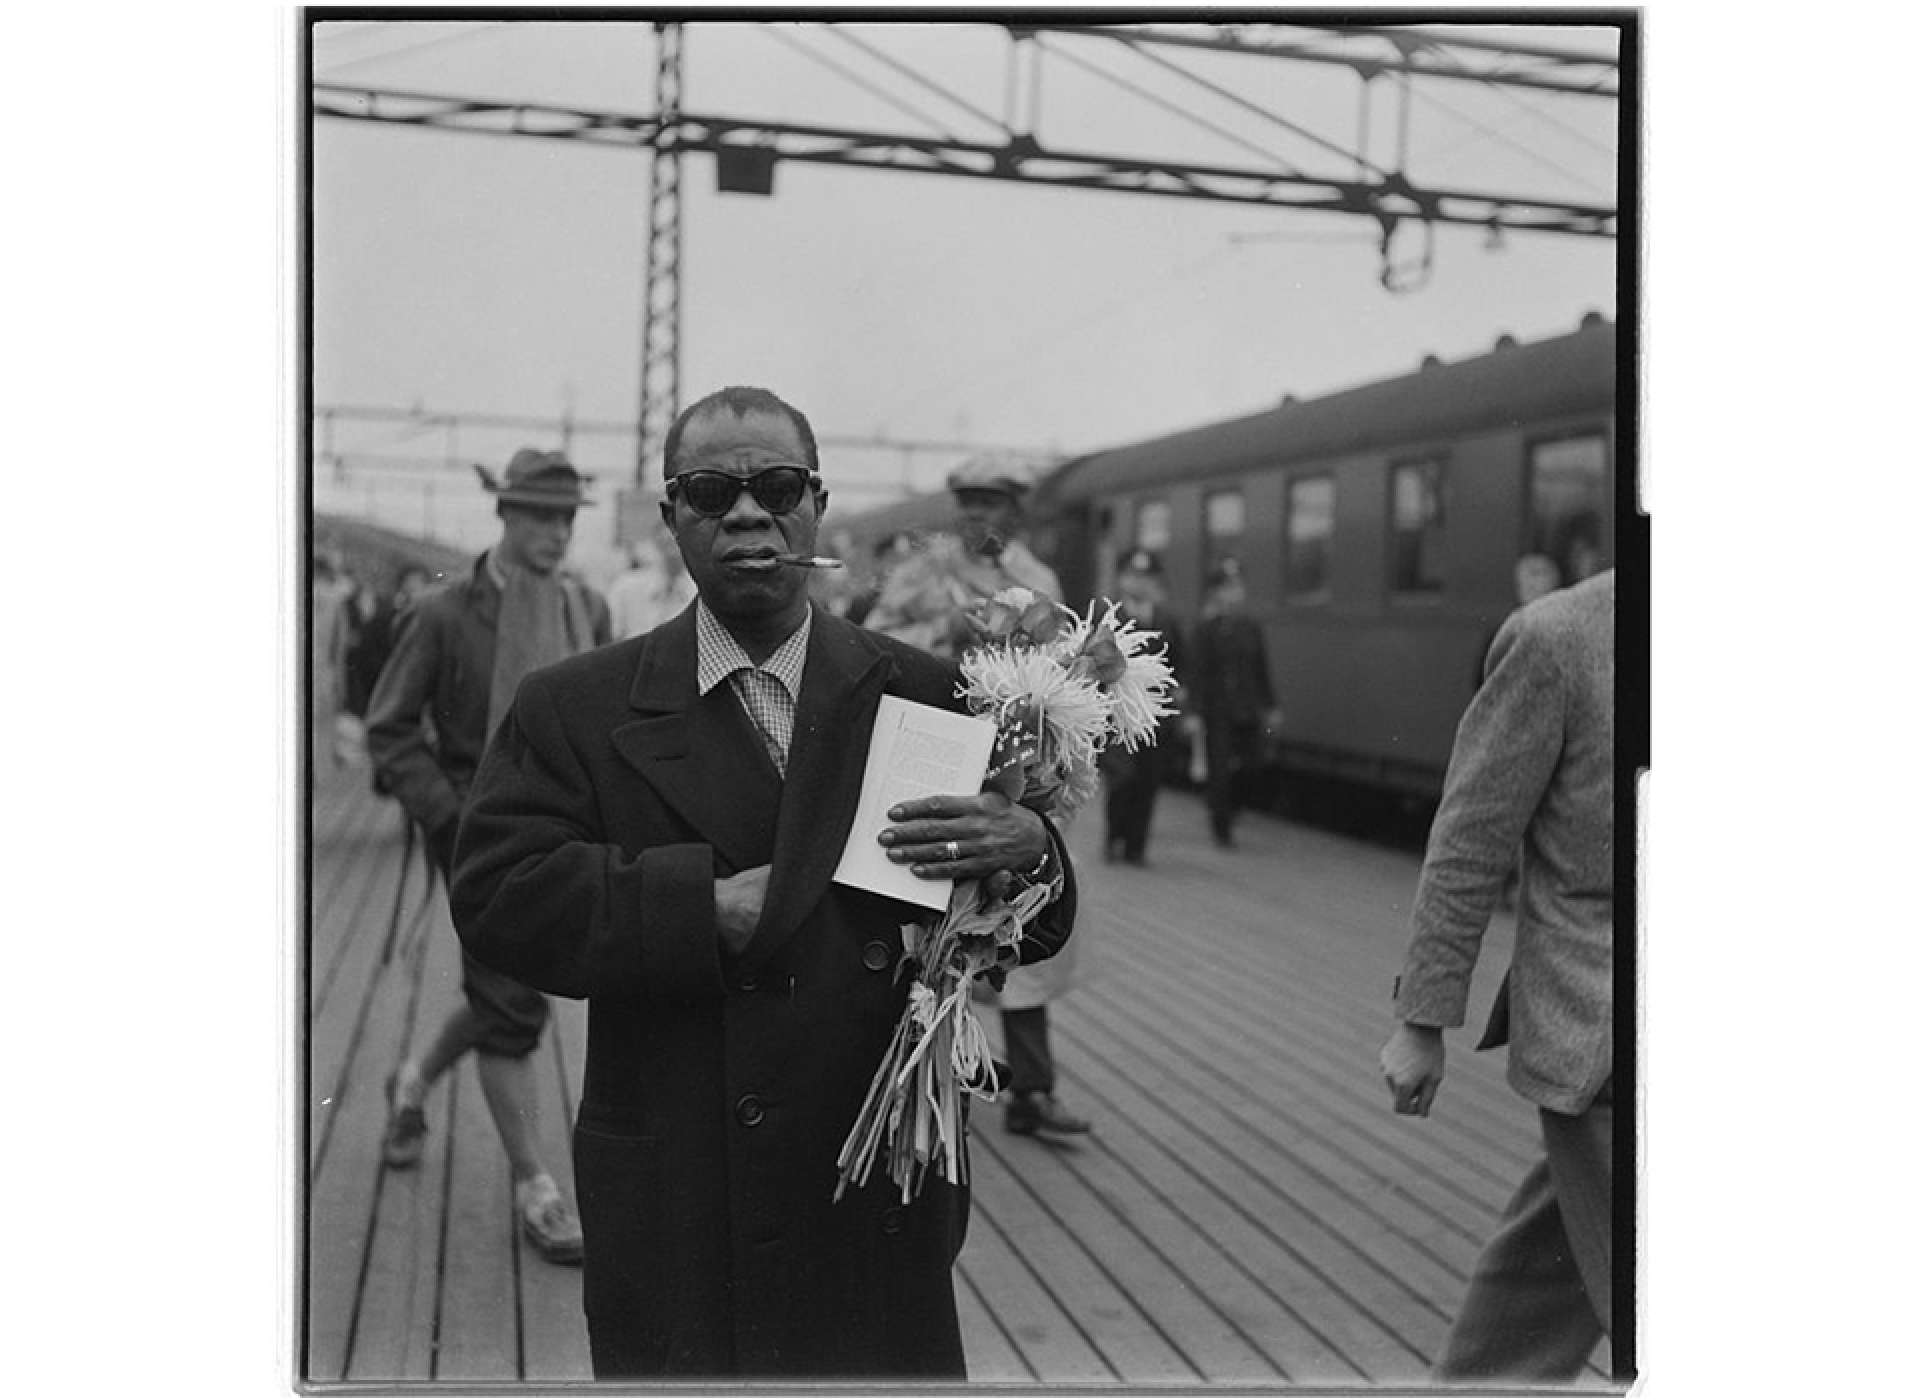 Louis Armstrong on his way to a concert in Oslo, Norway in 1955